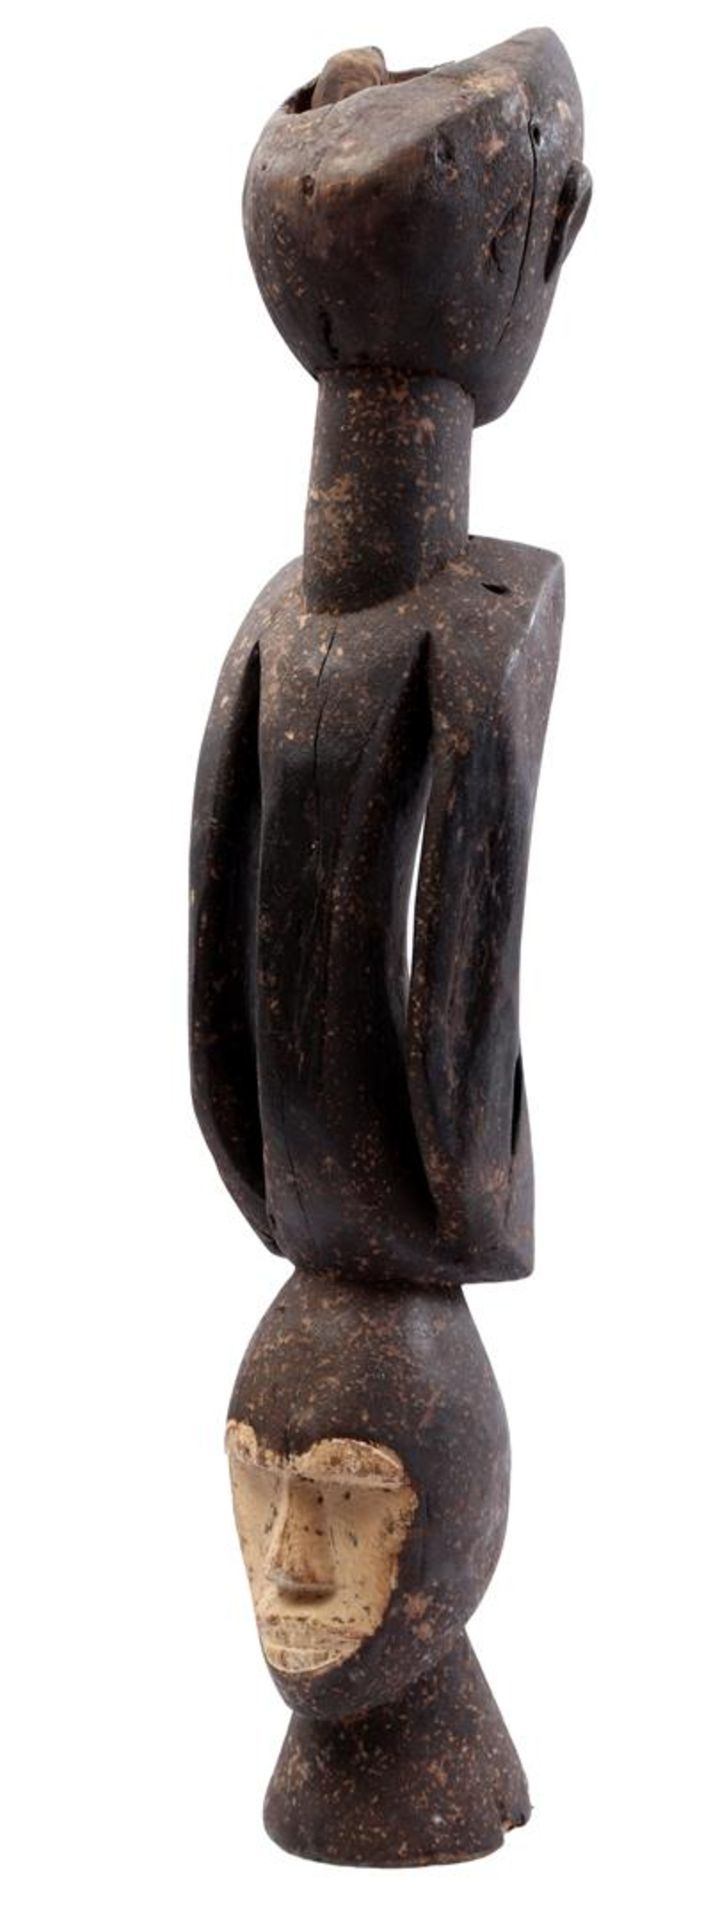 Wooden ceremonial statue - Image 2 of 6